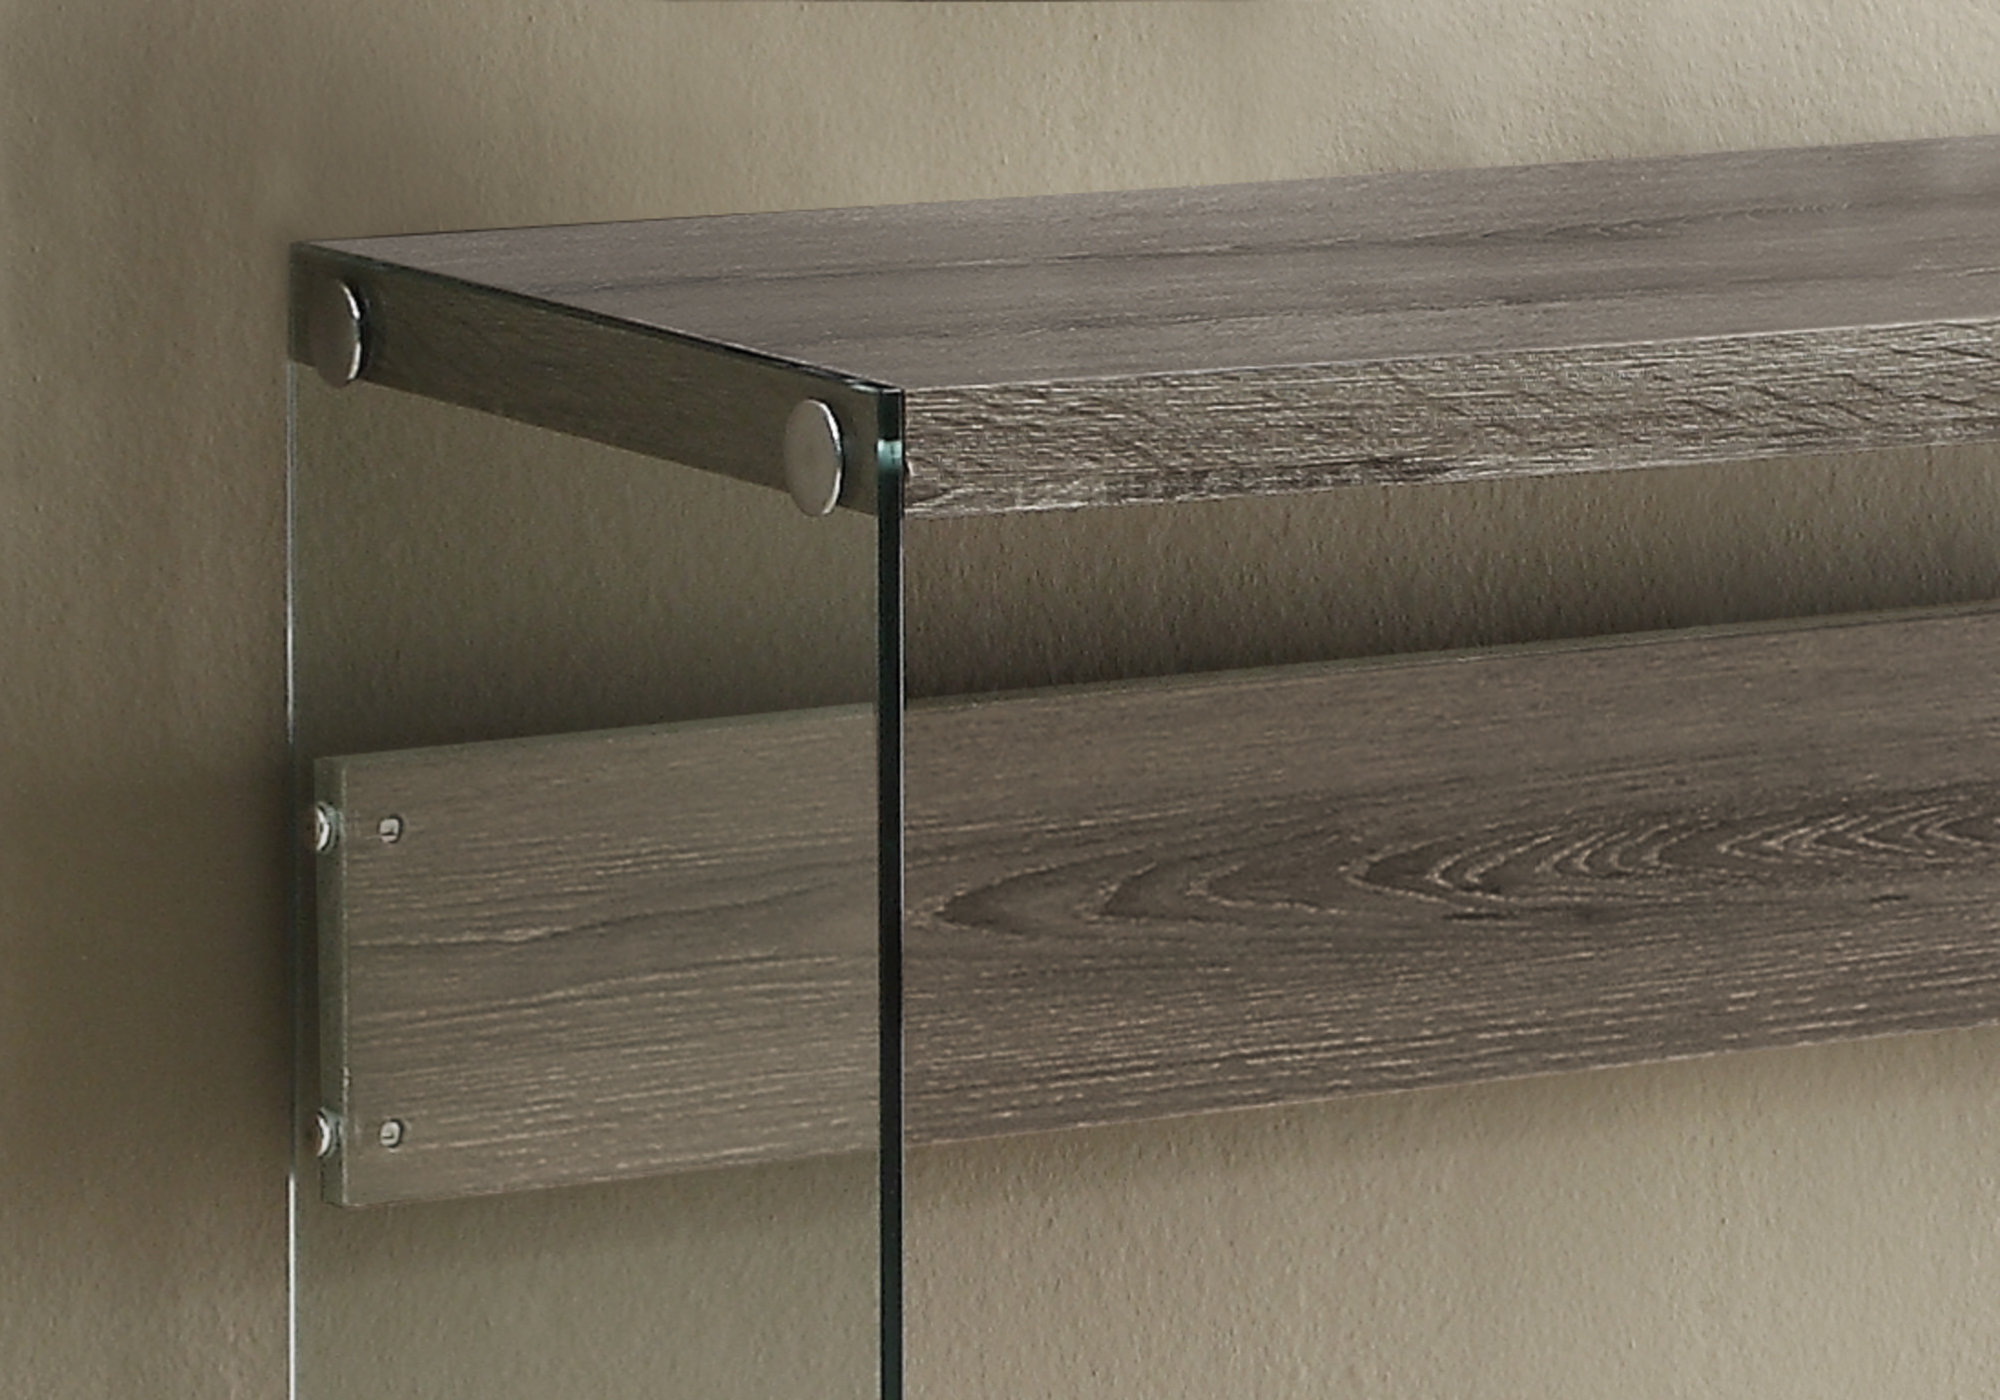 ACCENT TABLE - 44"L / DARK TAUPE / TEMPERED GLASS